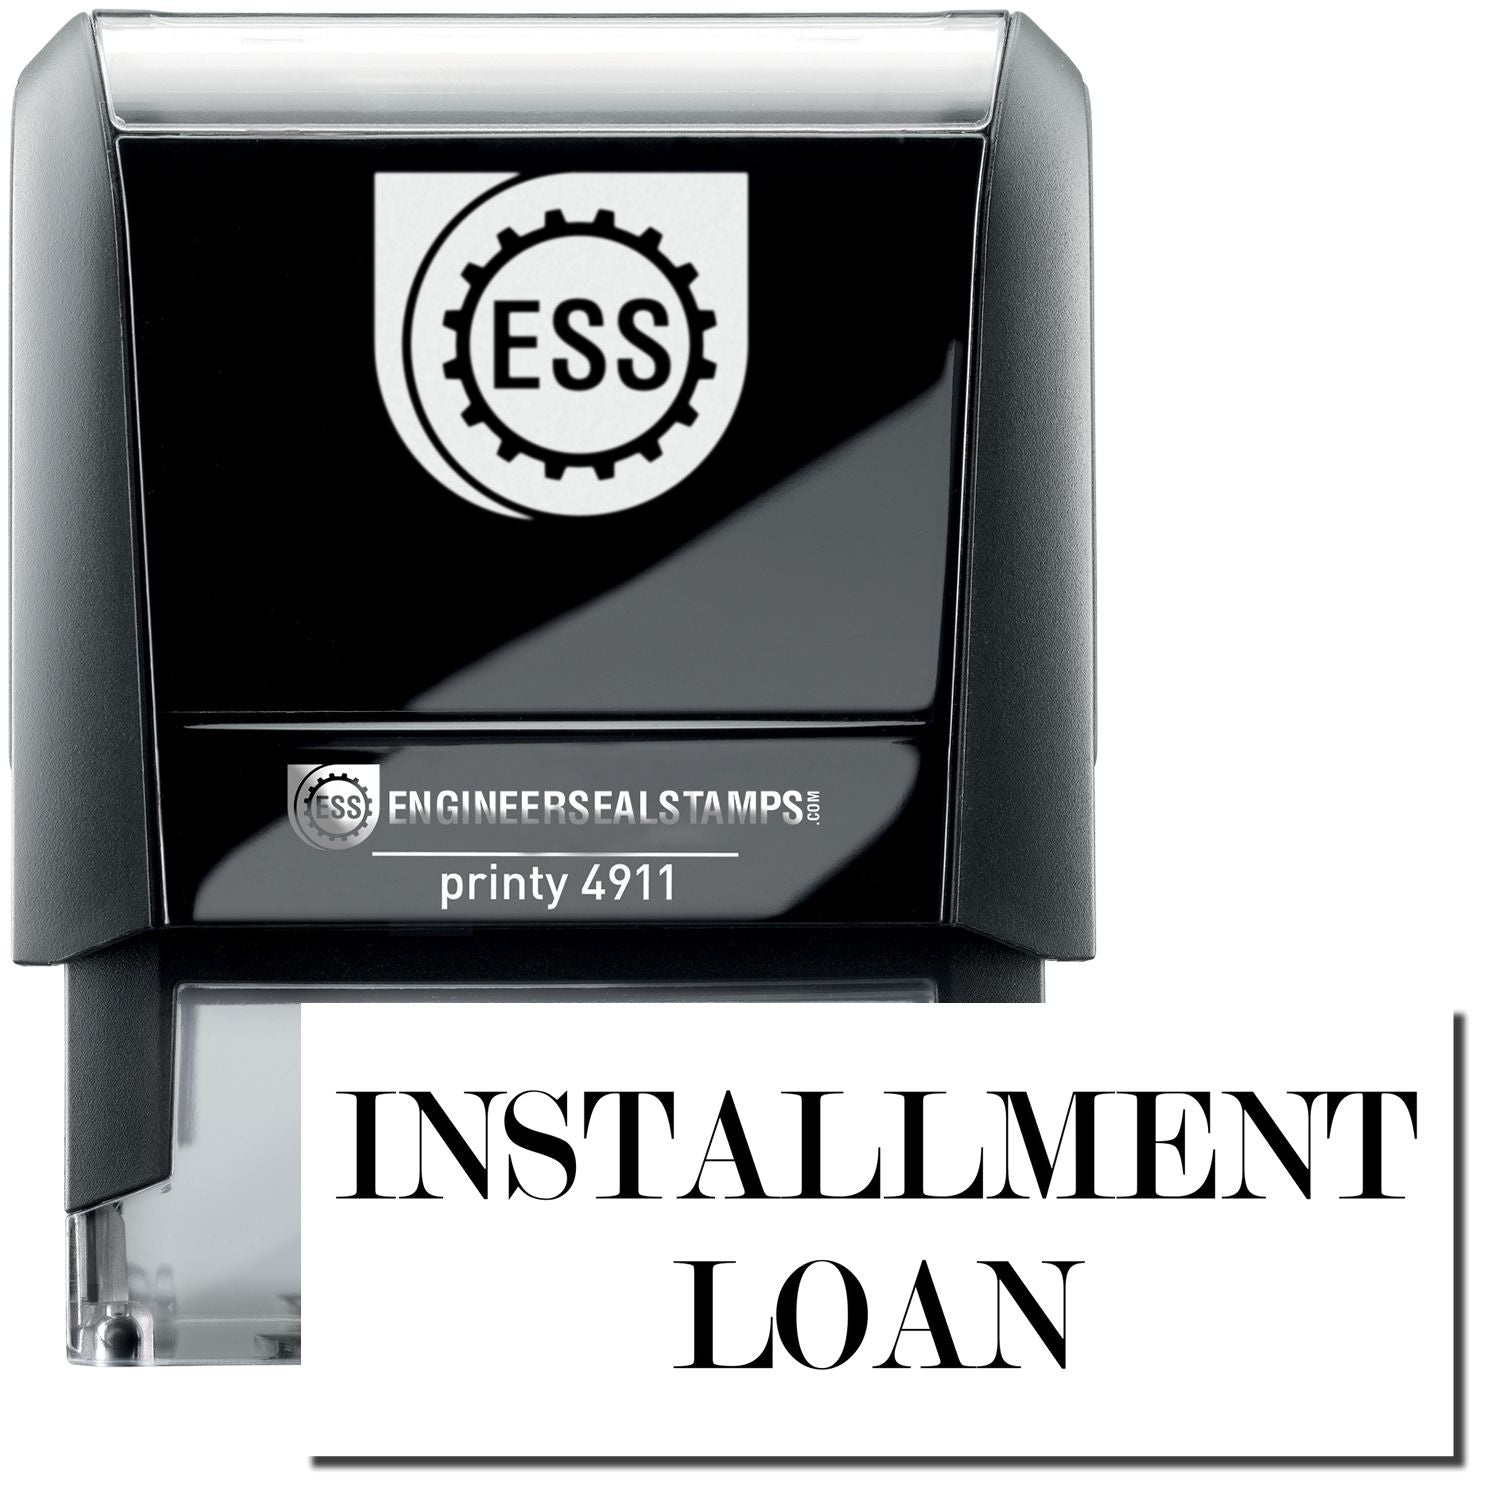 A self-inking stamp with a stamped image showing how the text "INSTALLMENT LOAN" is displayed after stamping.